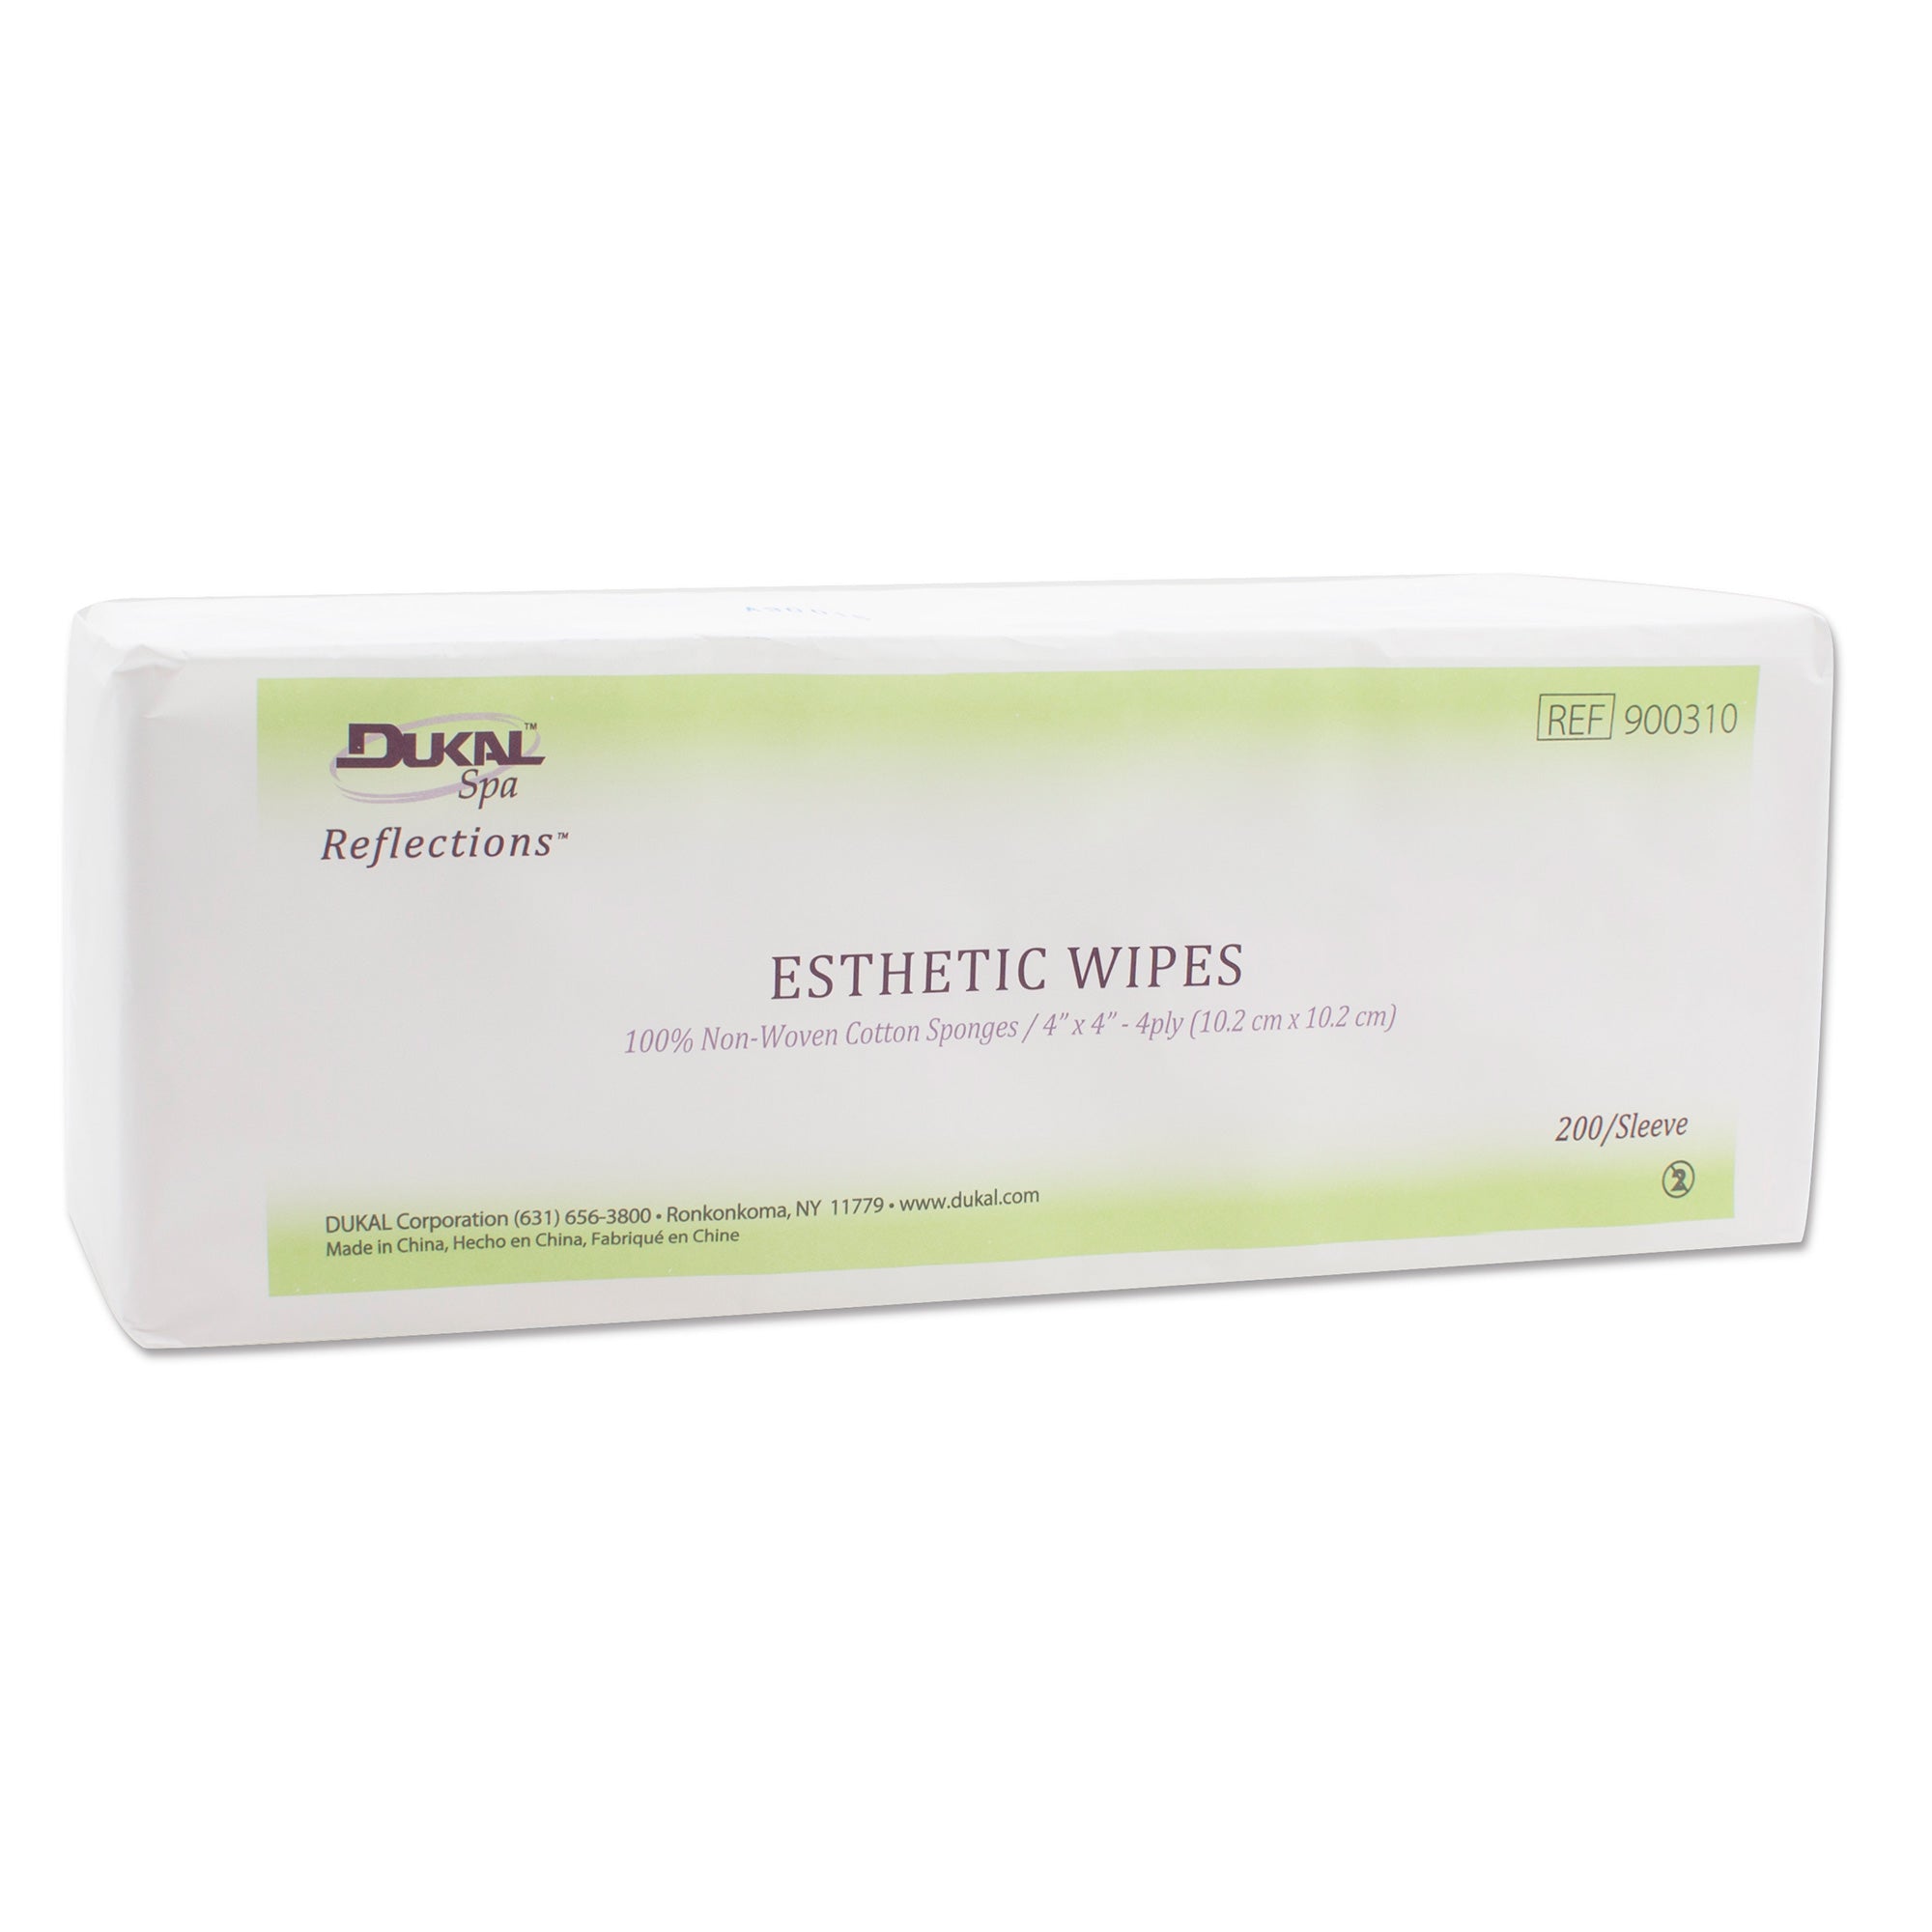 Reflections Esthetic Wipes